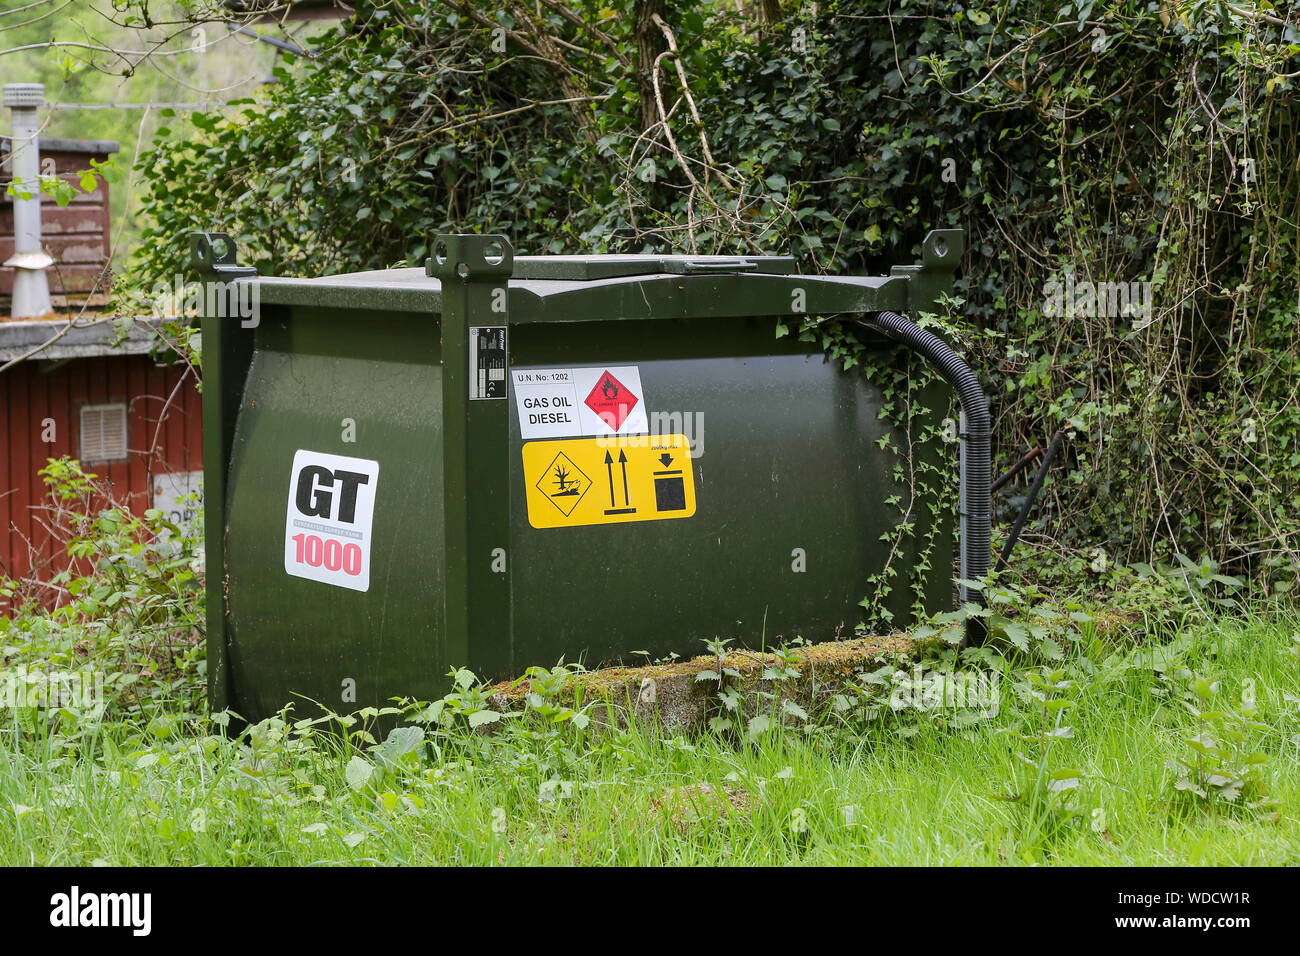 A 1000 Litre Generator Tank called a GT 1000 to hold 1000 litres of gas oil diesel, Herefordshire, England, UK Stock Photo